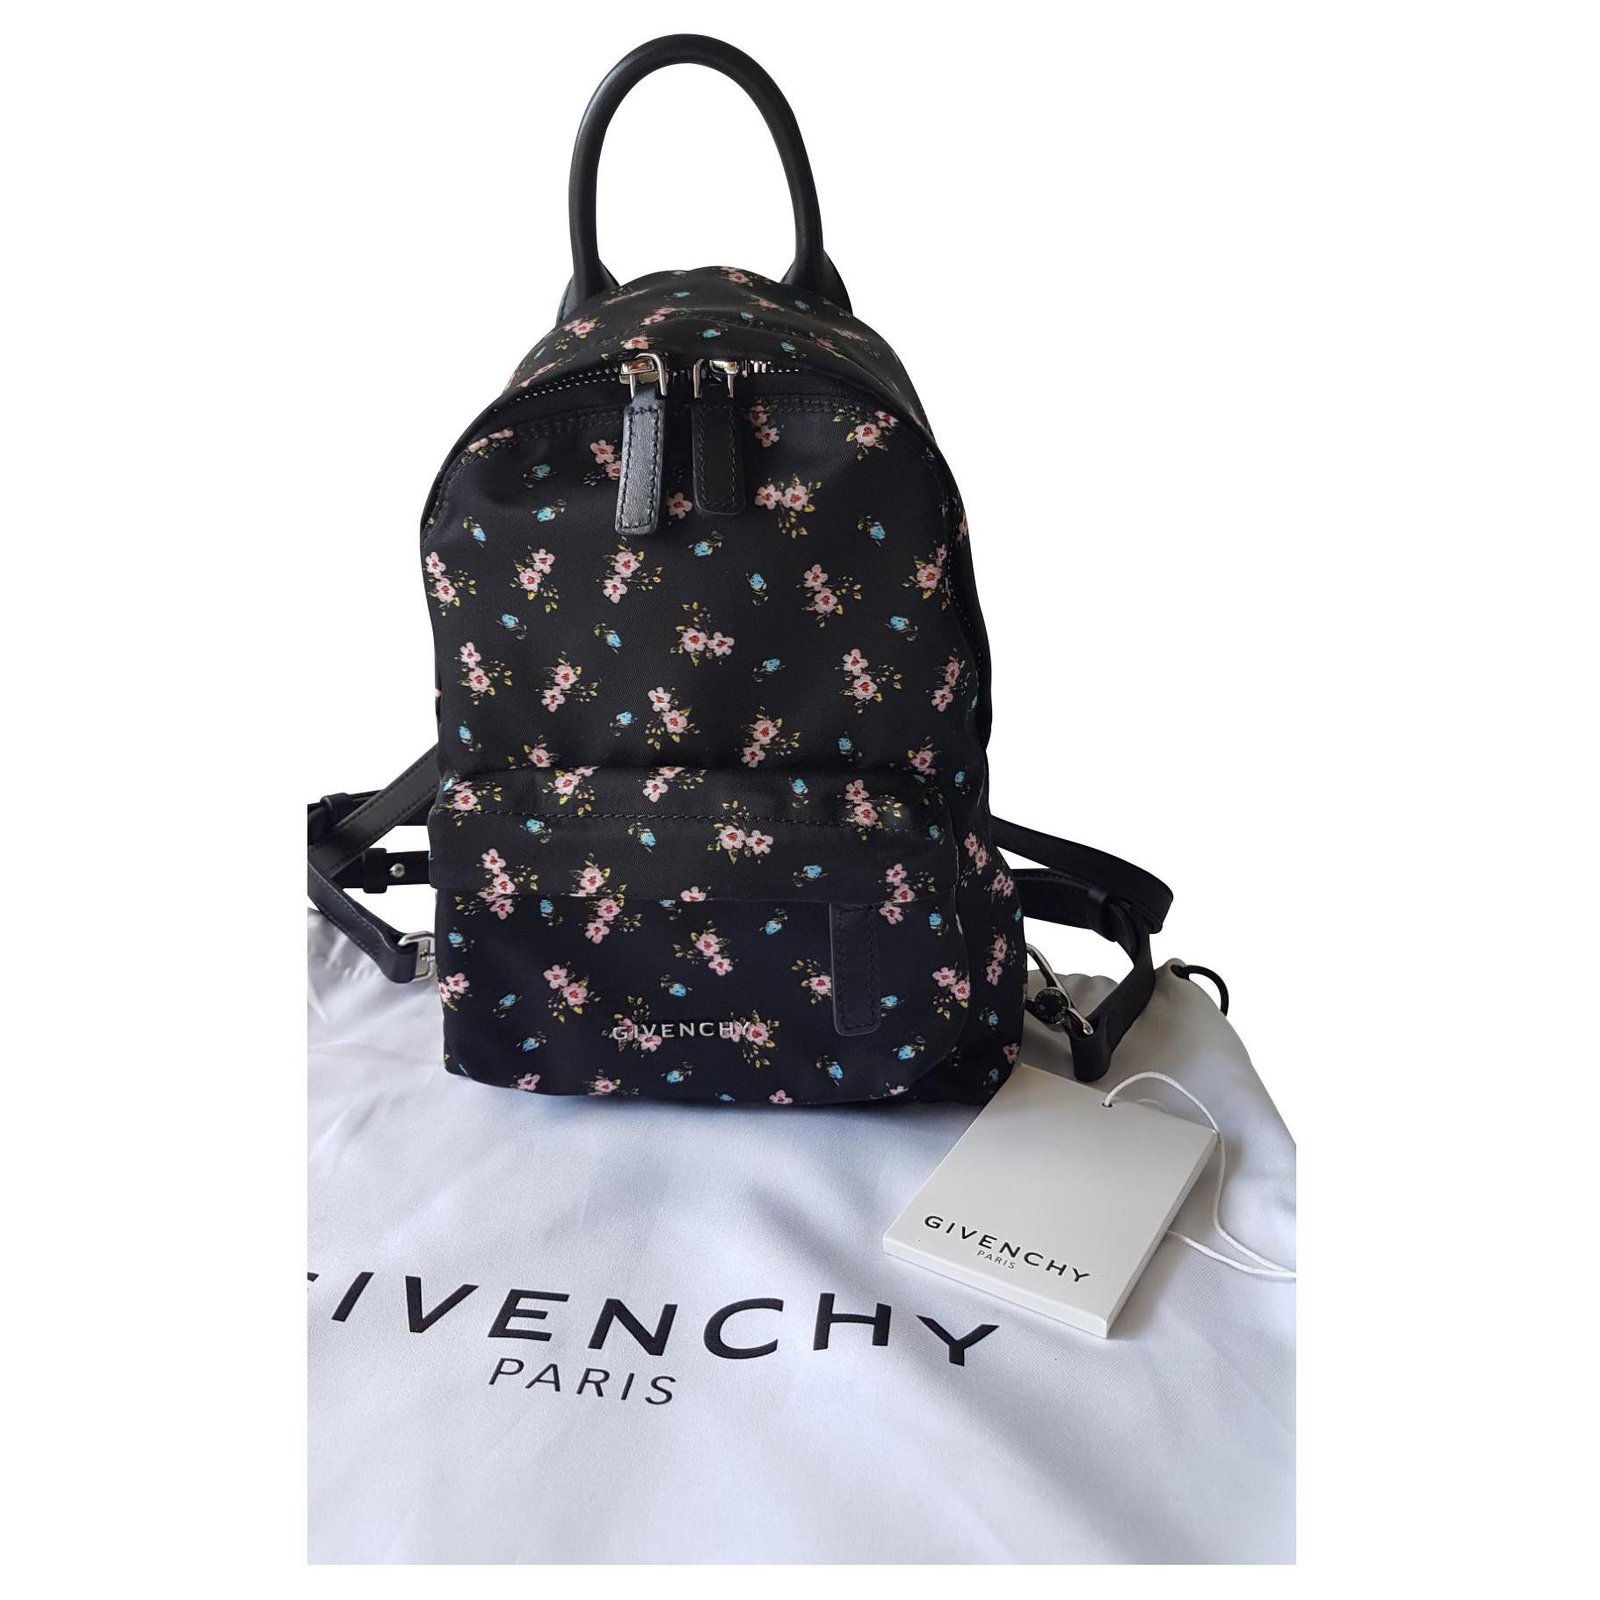 givenchy nano leather backpack